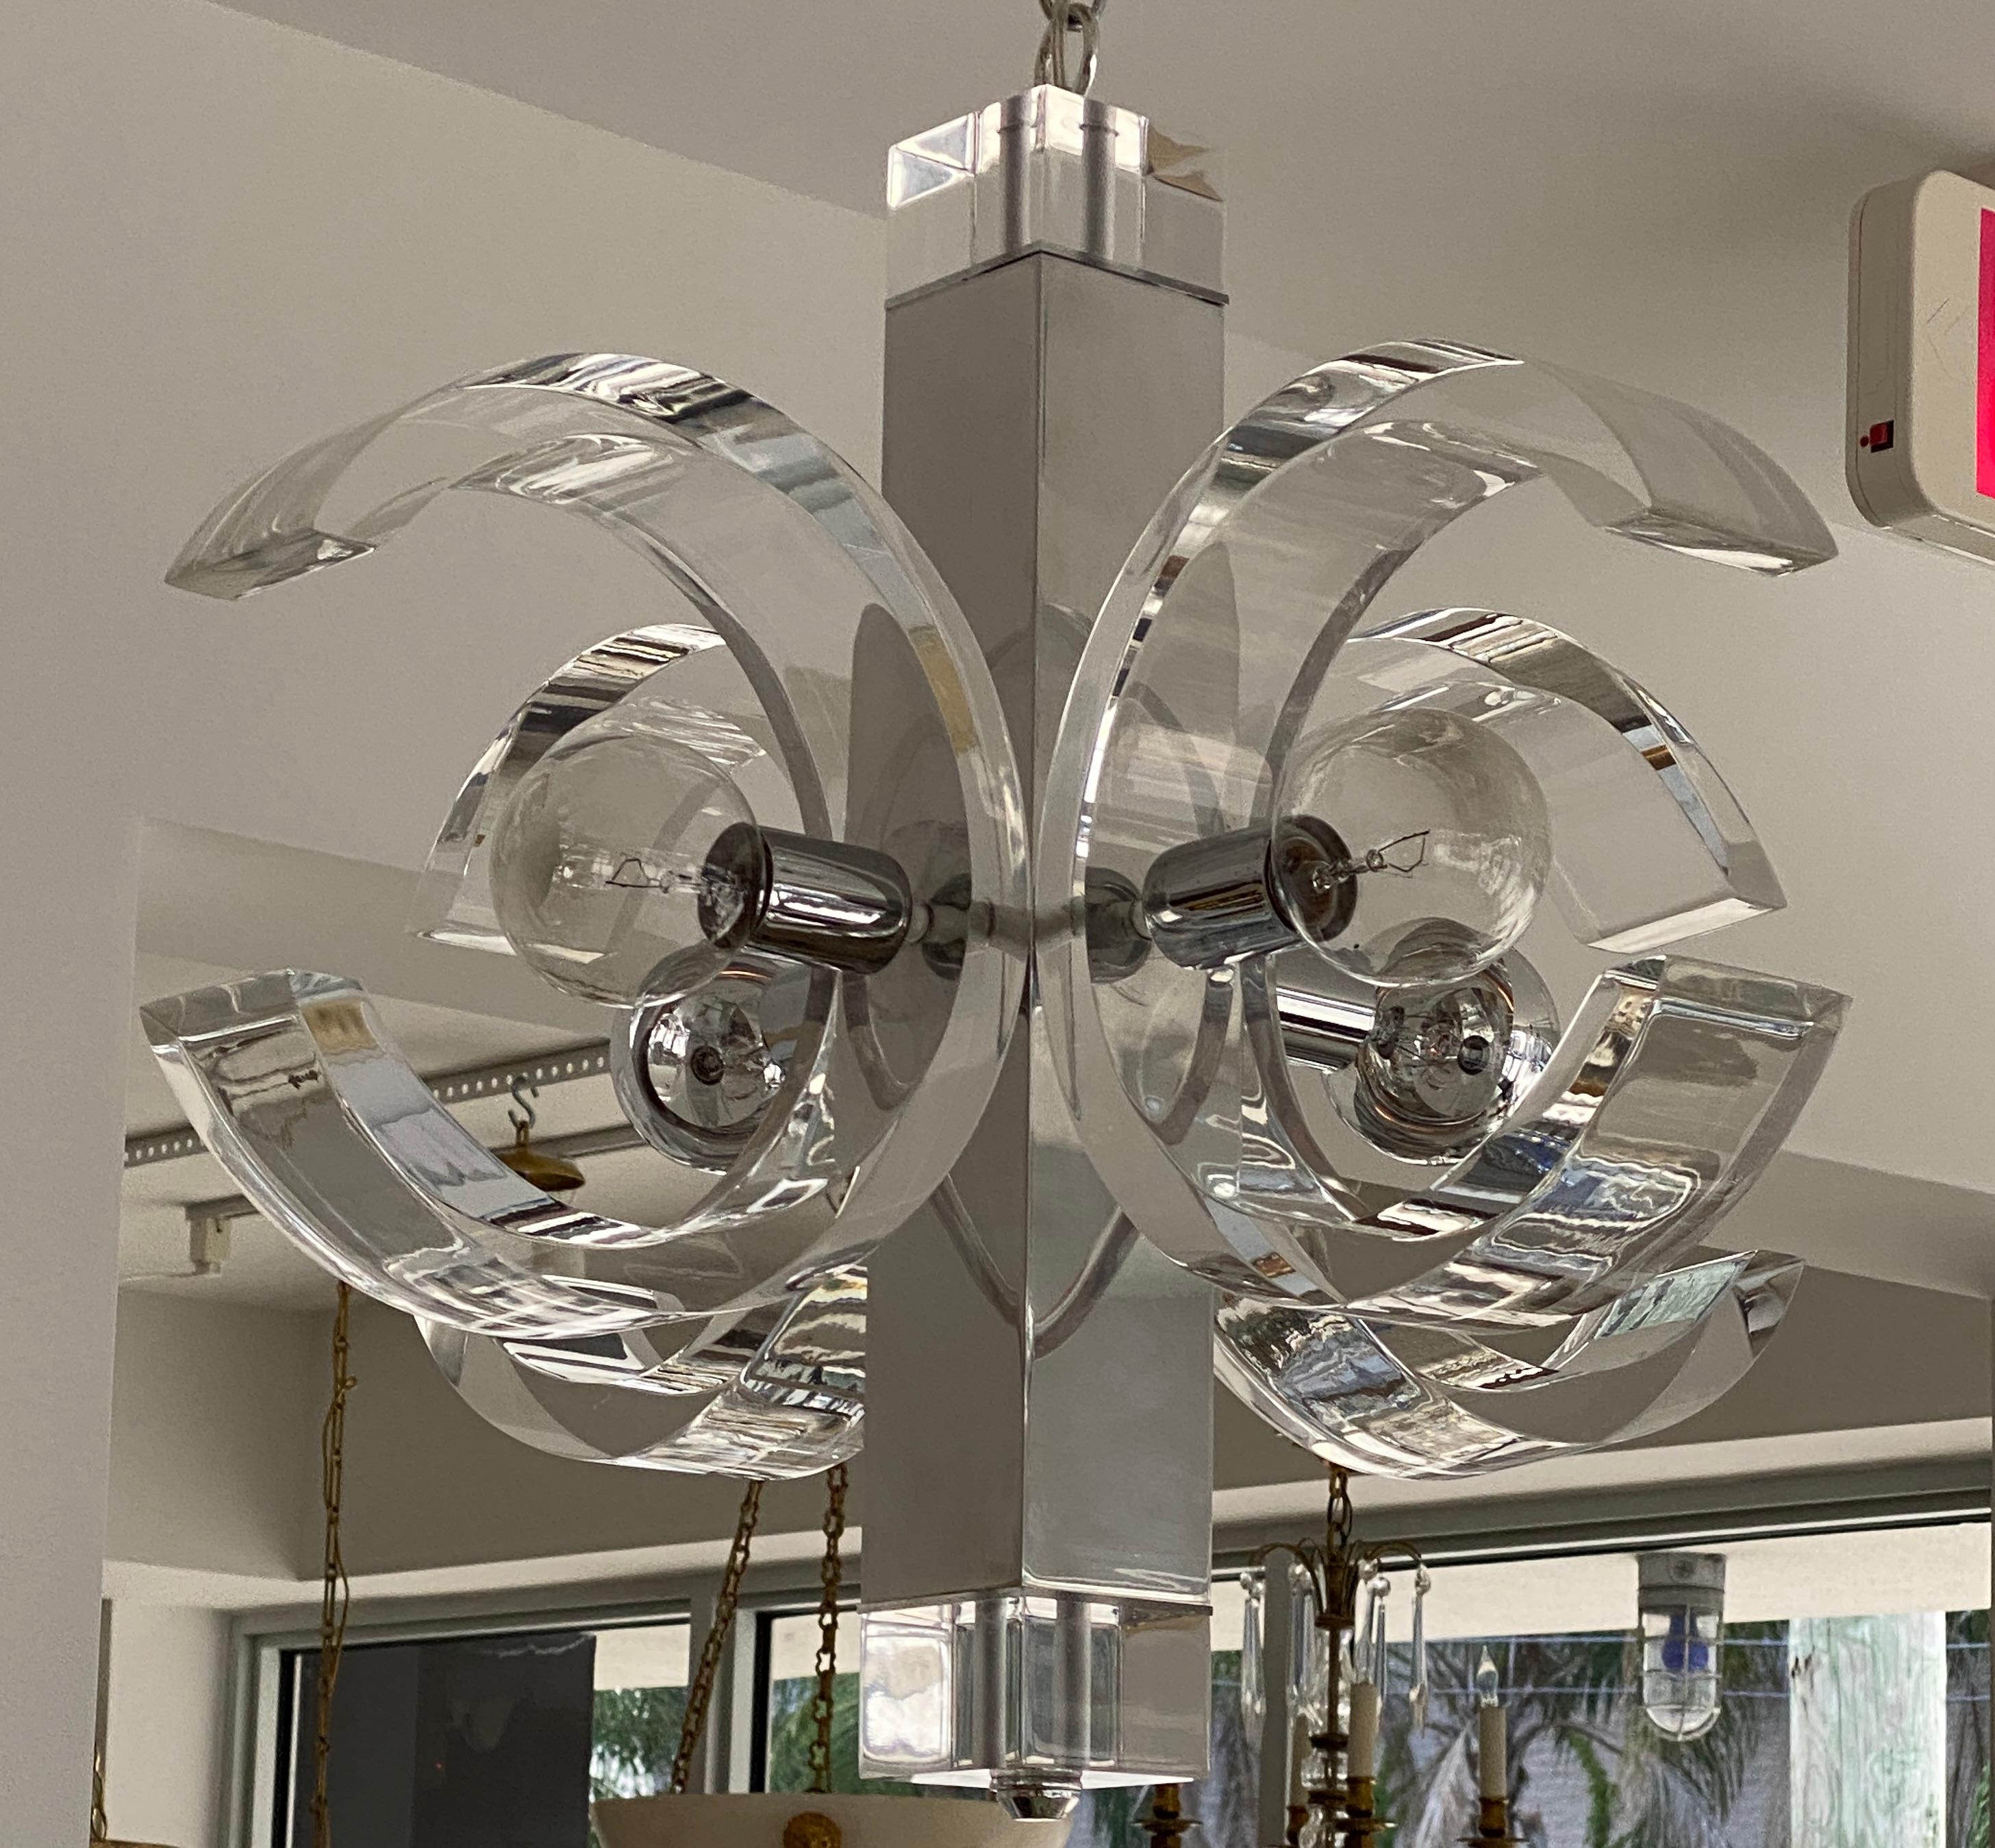 This stylish and chic 1970s lucite and aluminum chandelier is by Charles Hollis Jones and it will make a definite statement with its 